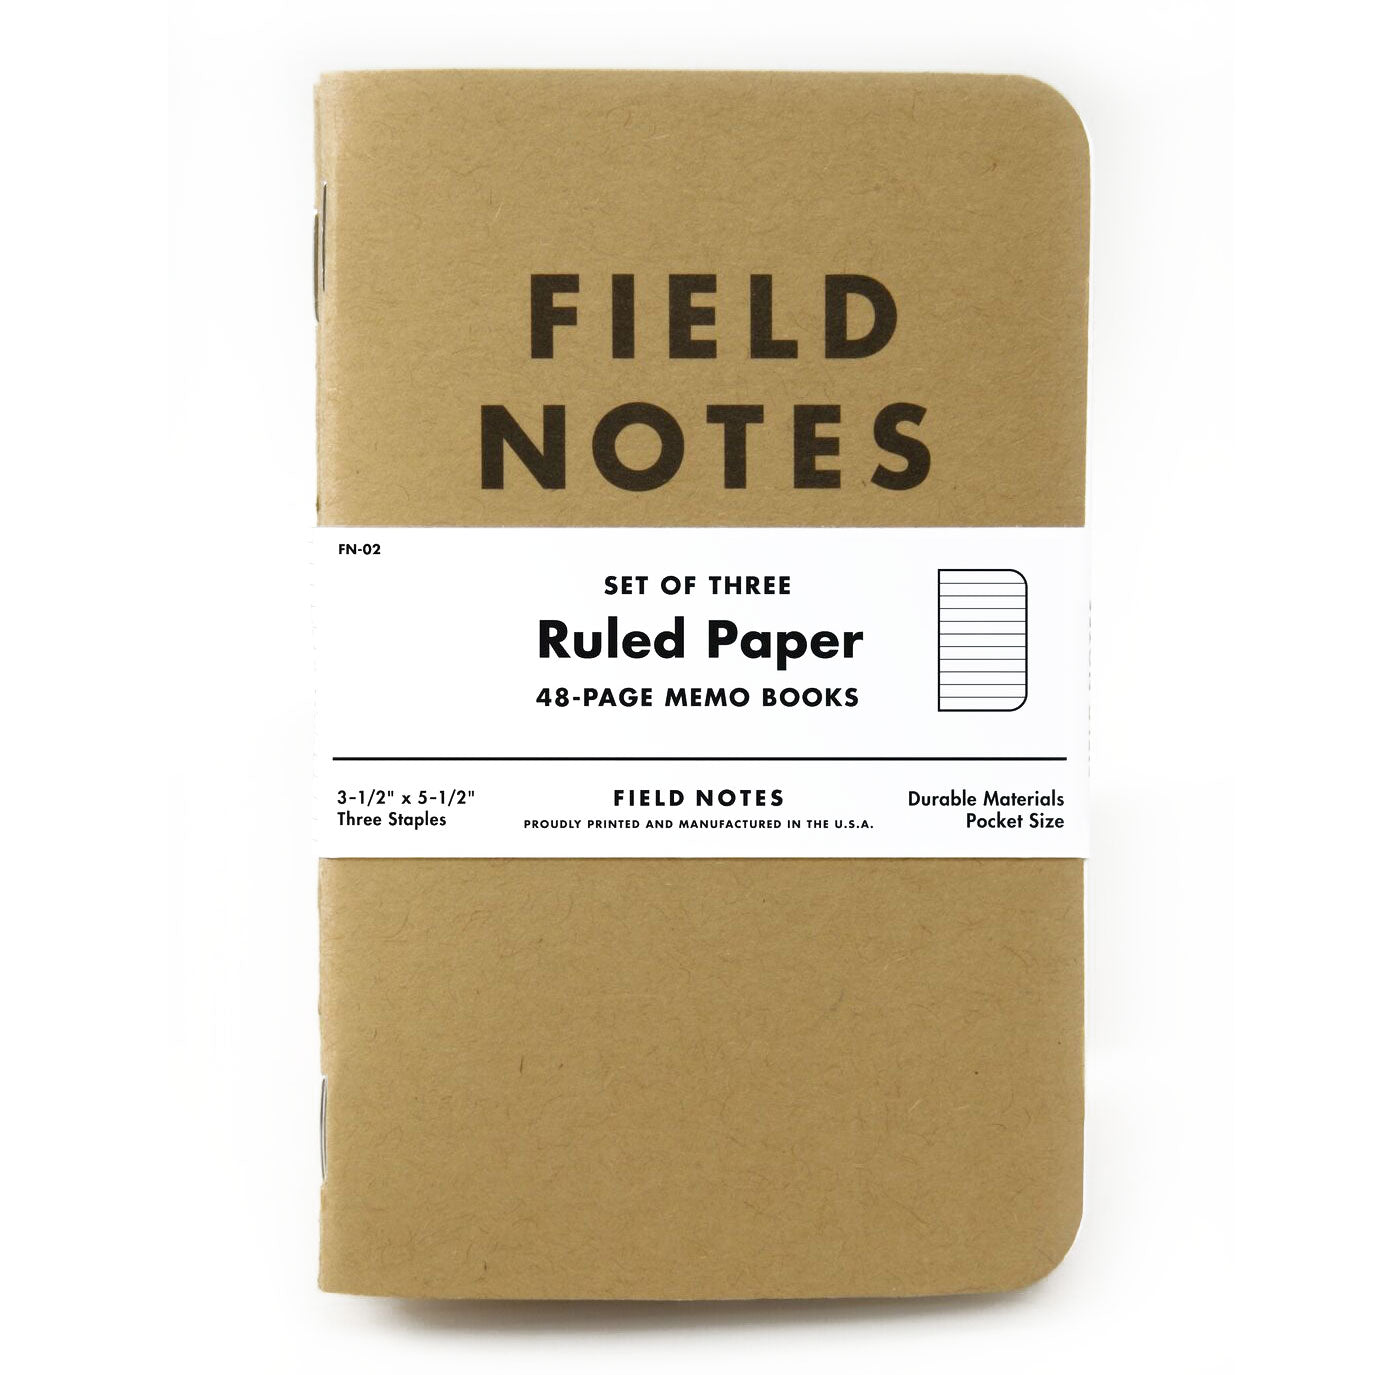 Field Notes Ruled Paper Memo Notebooks (Set of 3)